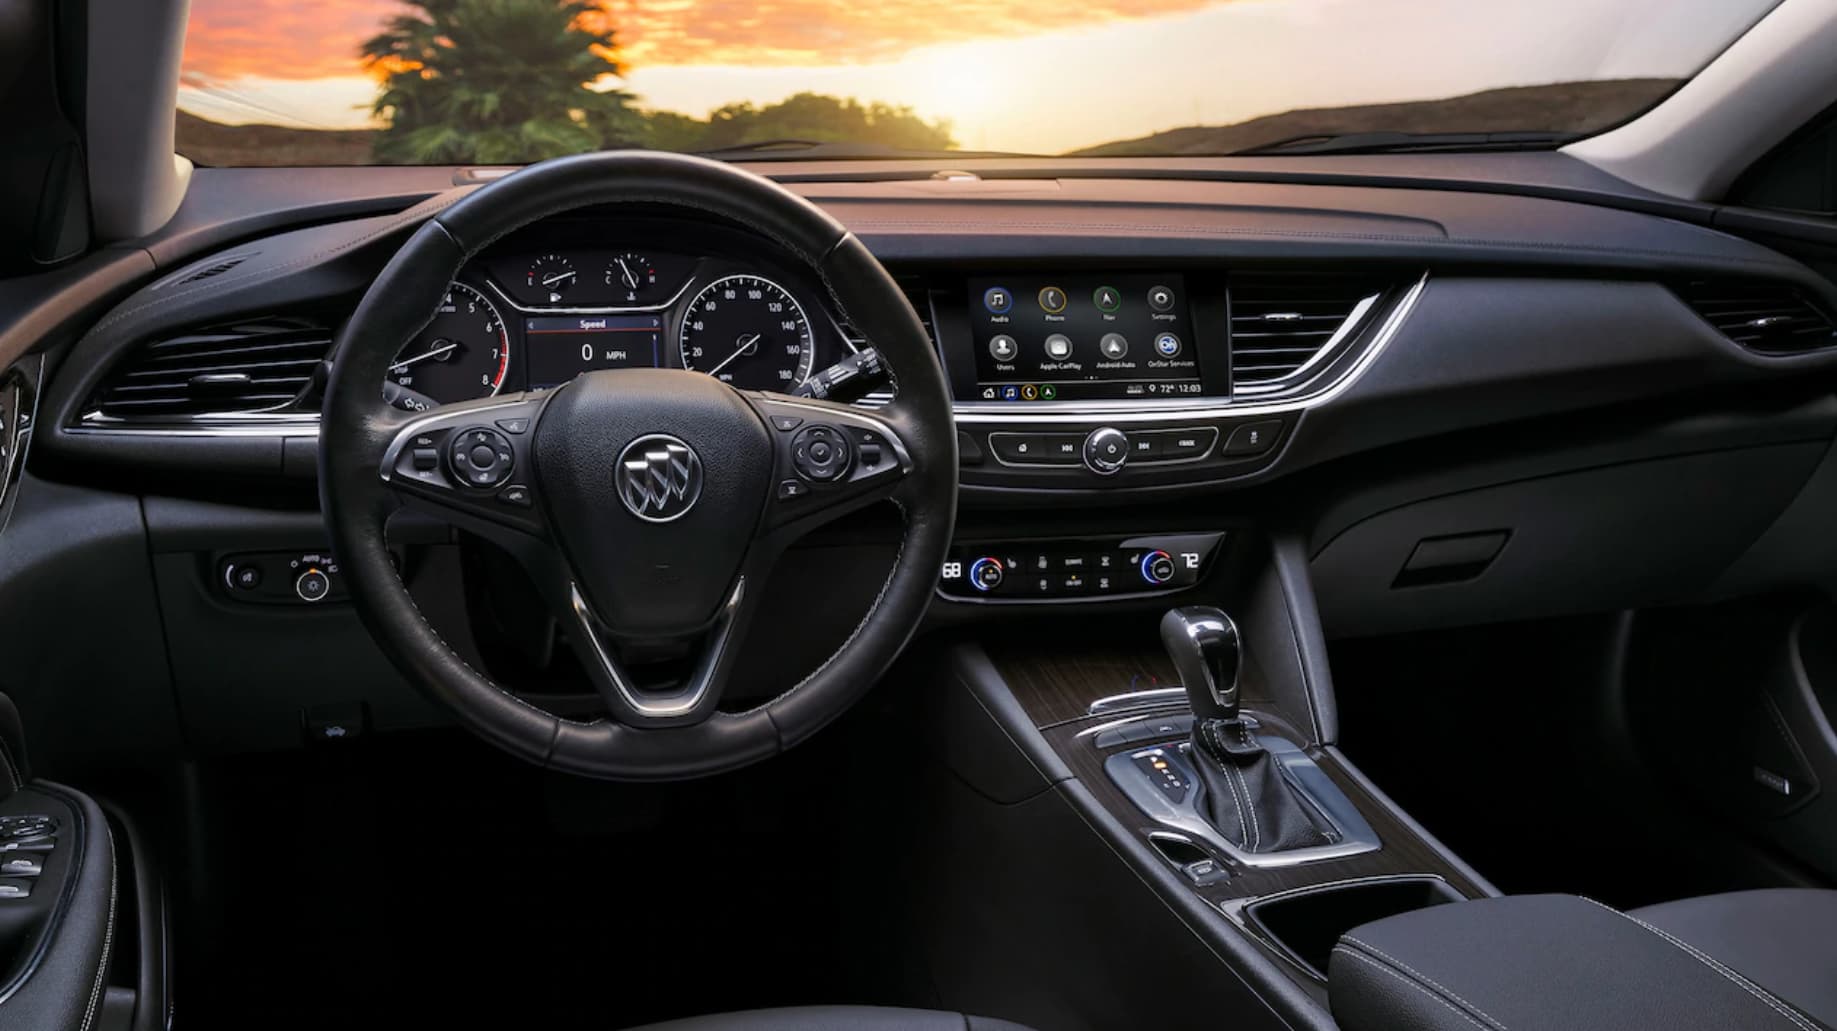 Black leather interior of 2019 Buick Regal Tourx dashboard at sunset